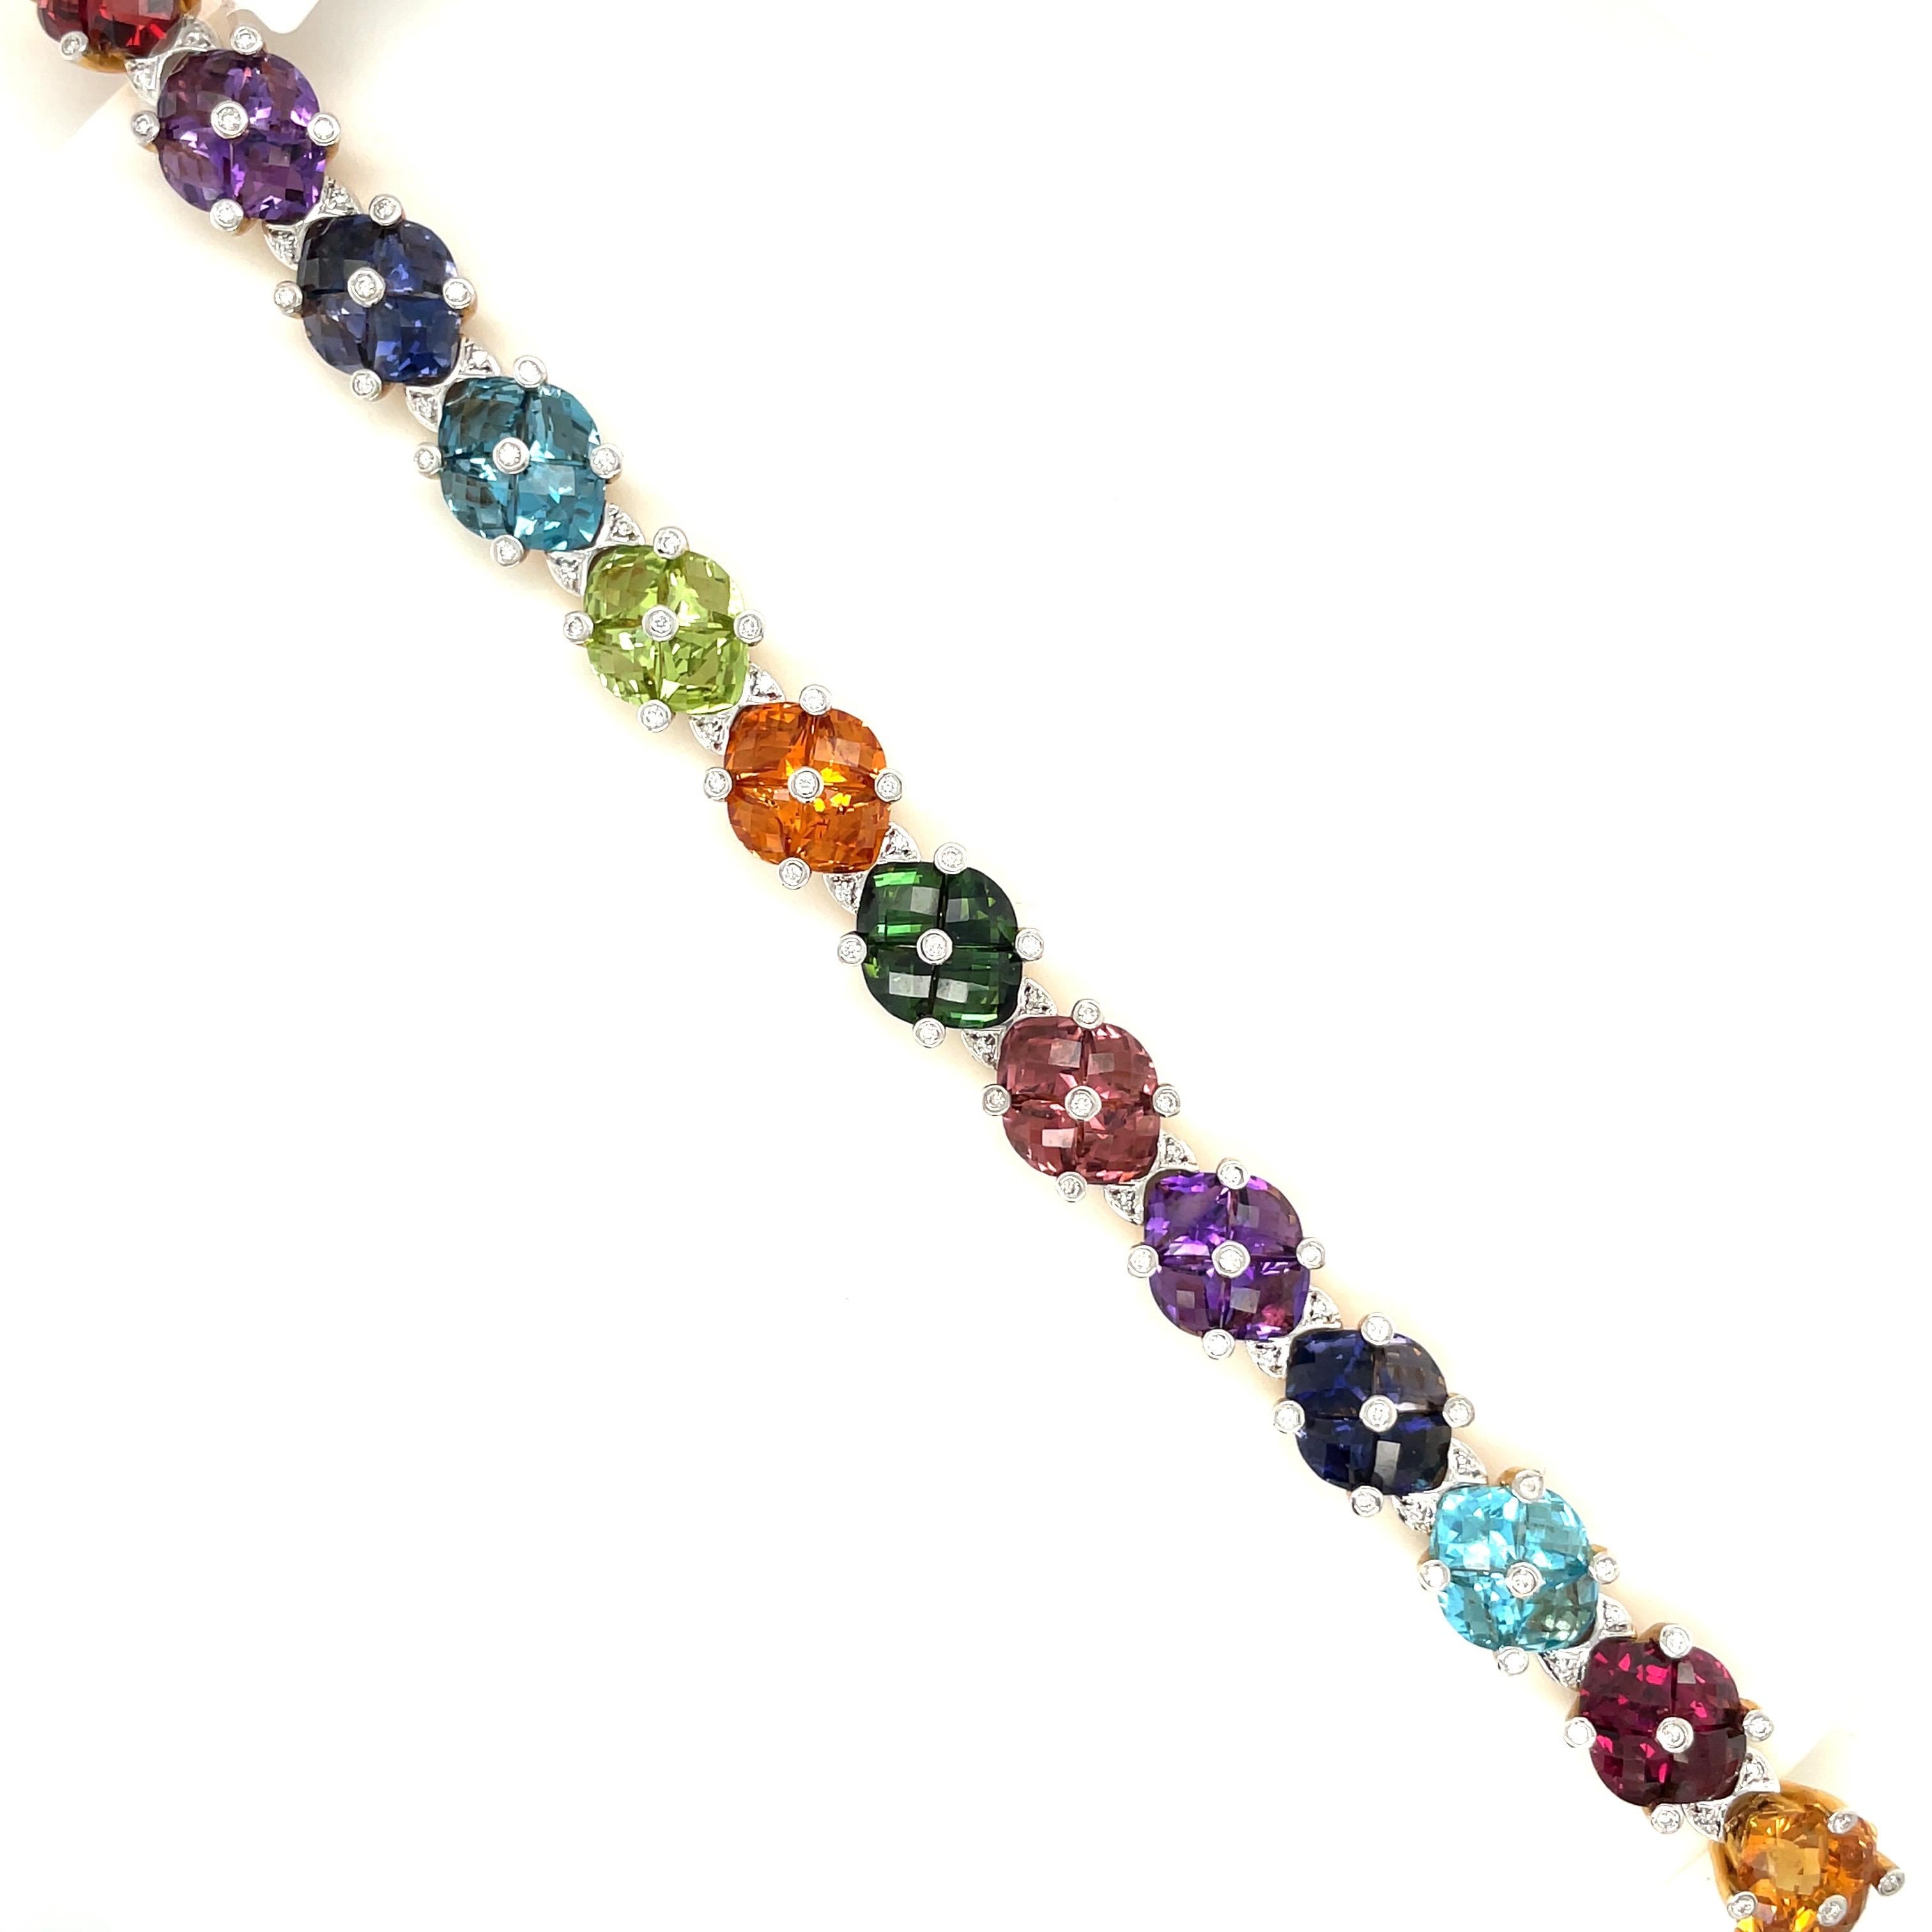 This colorful 18 karat yellow gold and semi precious stone bracelet is designed with 14 cushion shaped sections. Each section is set with 4 briolette cut stones. The semi precious stones are citrine, garnnet, blue topaz, iolite, amethyst, pink and